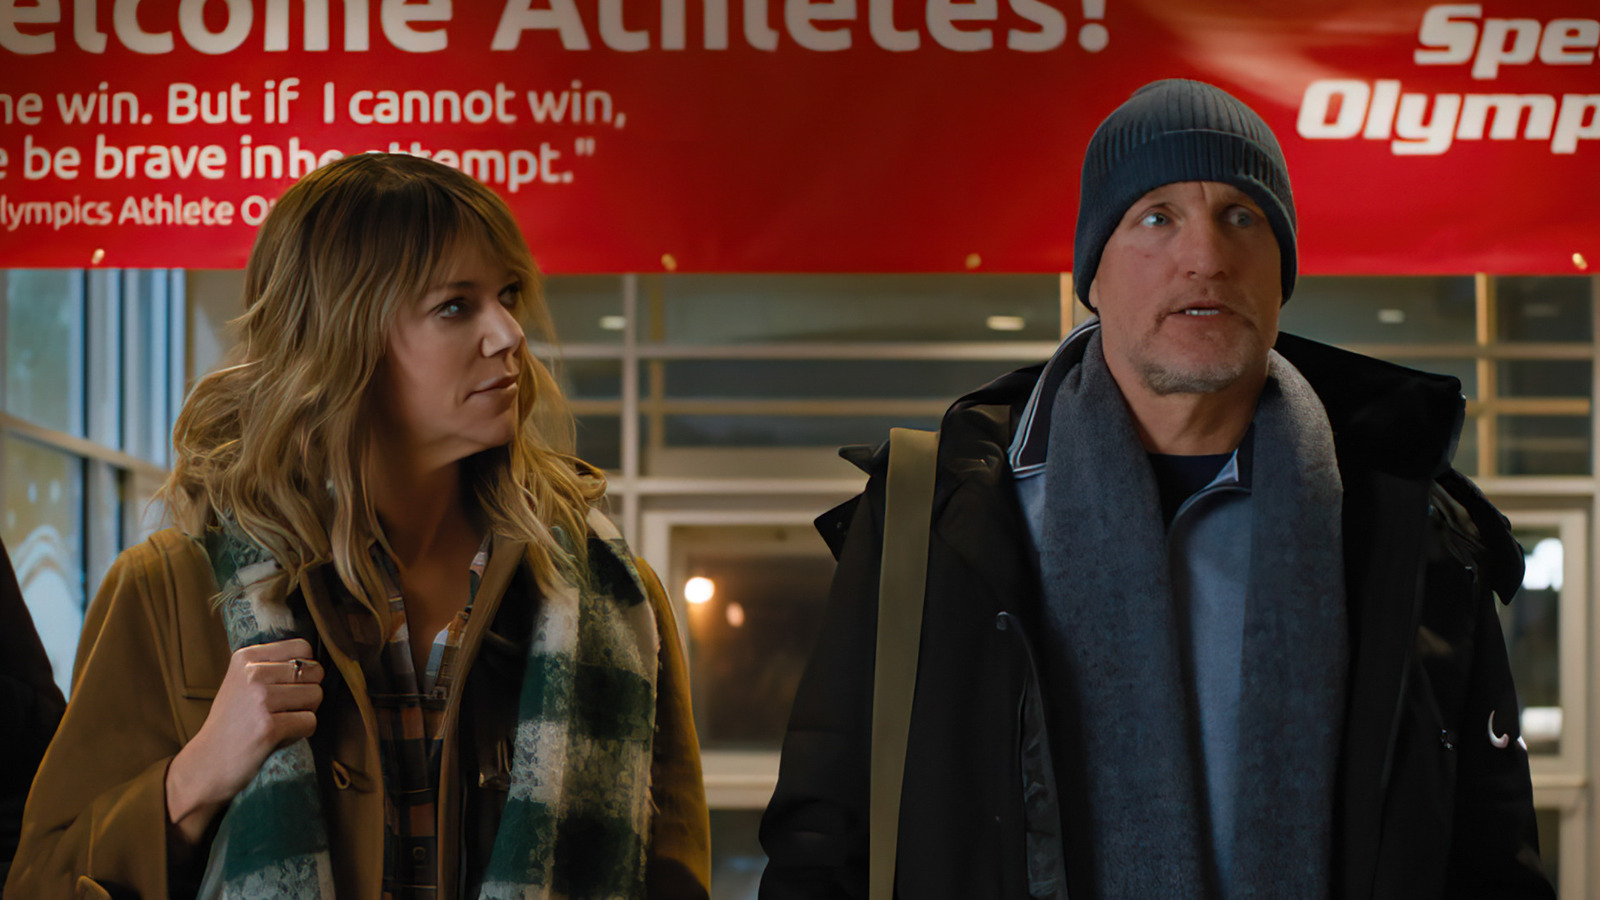 Champions' review: Woody Harrelson stars, but the ensemble shines